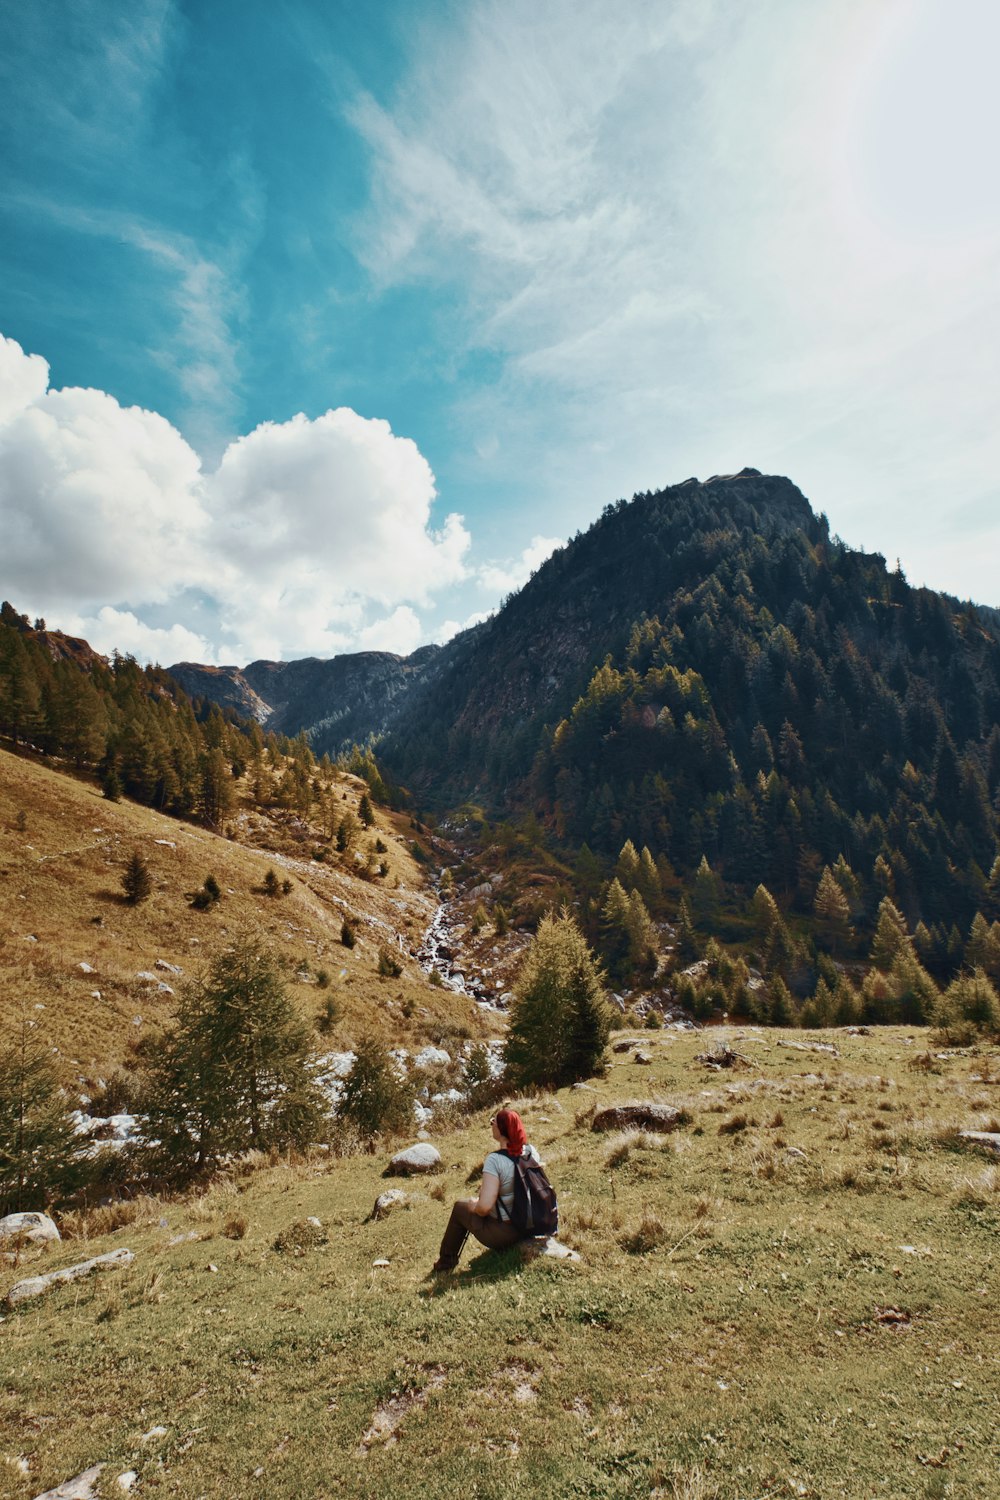 person in red jacket walking on dirt road near green trees and mountains during daytime